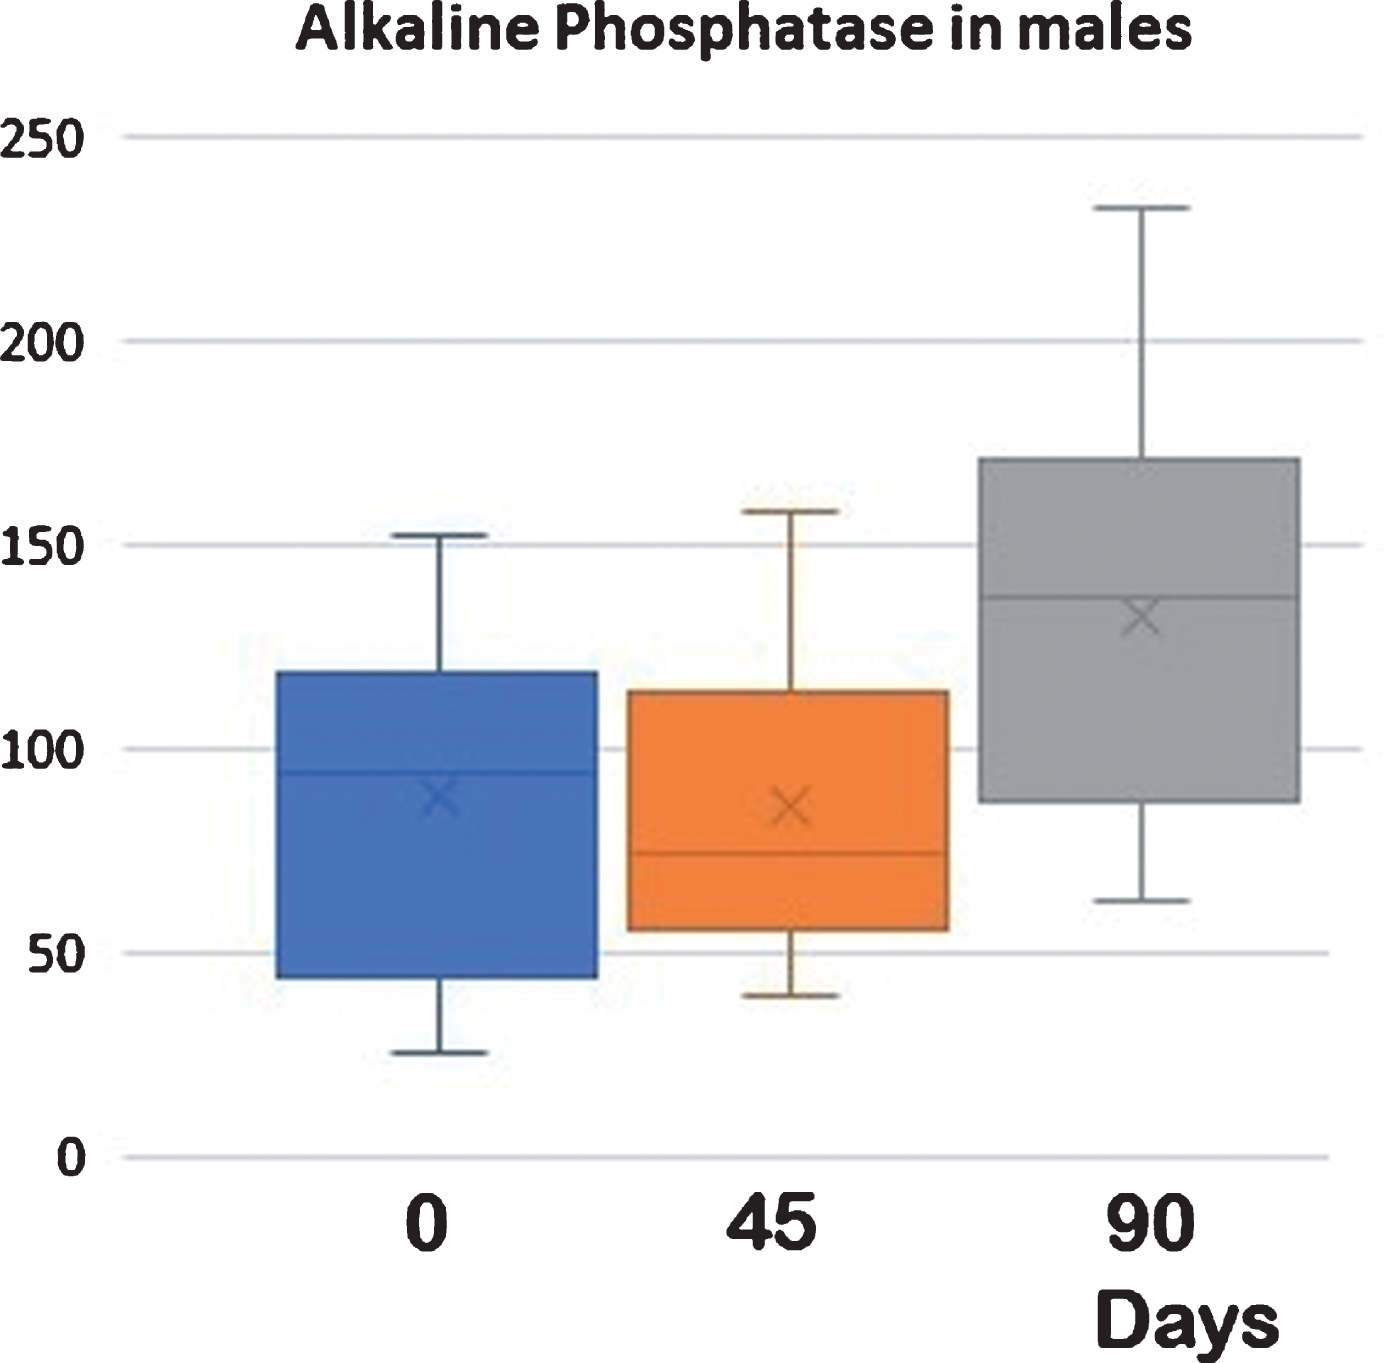 Alkaline Phosphatase in males at different times and treatments. D0 vs D45 NS: D45 vs D90 < 0.05: D0 vs D90 < 0.05. Serum alkaline phosphatase in males. After 45 days of supplementation, serum concentrations of total alkaline phosphatase decreased but did not reach statistical significance. These values returned to the beginning after 45 additional days of basal diet without supplementation (control). In this case, the increase in values from D45 to D90 was statistically significant, whereas no differences were observed between the baseline and the data on day 90, (see Table 2).